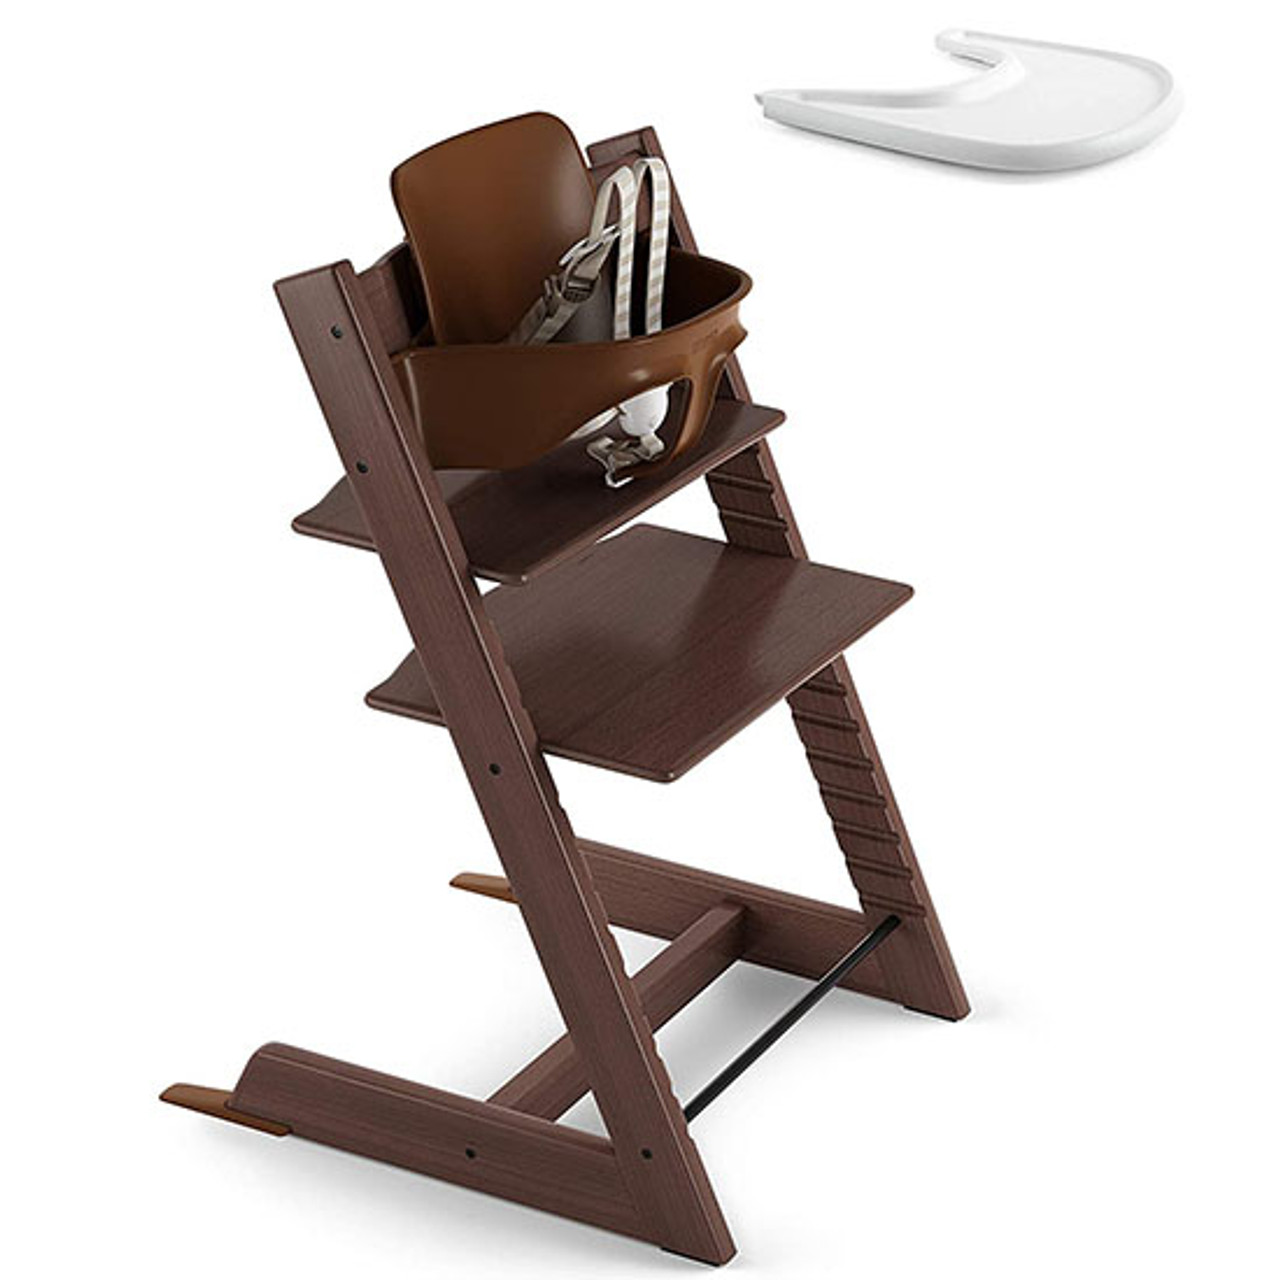 Stokke Tripp Trapp high chair with tray and accessories from Kidsland